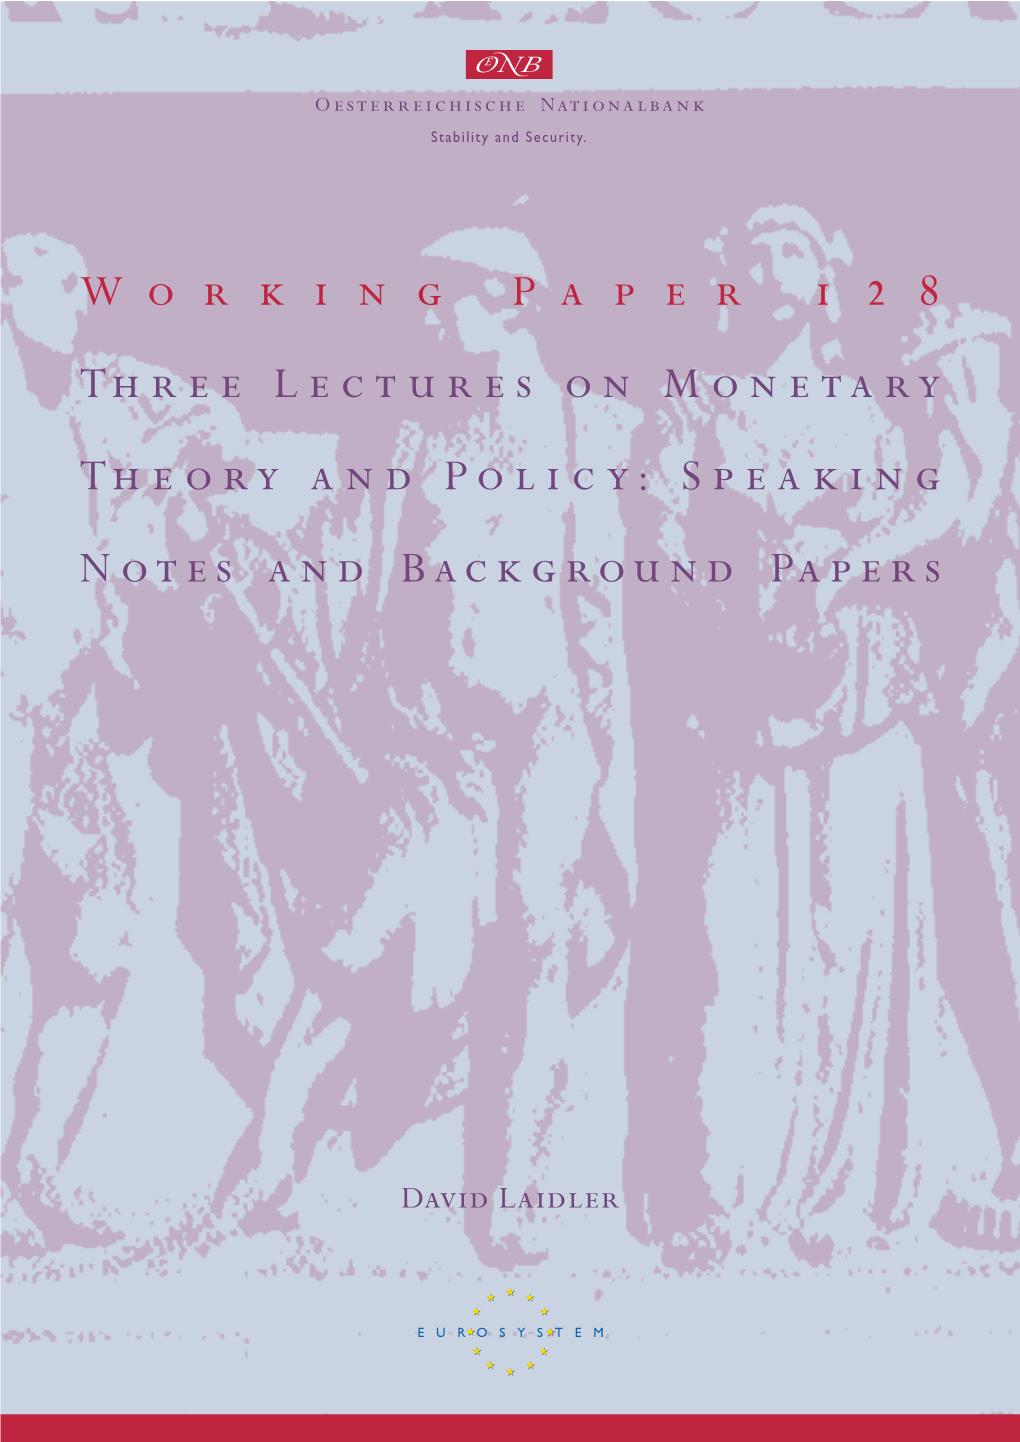 W Orking P Aper 1 2 8 Three Lectures on Monetary Theory And